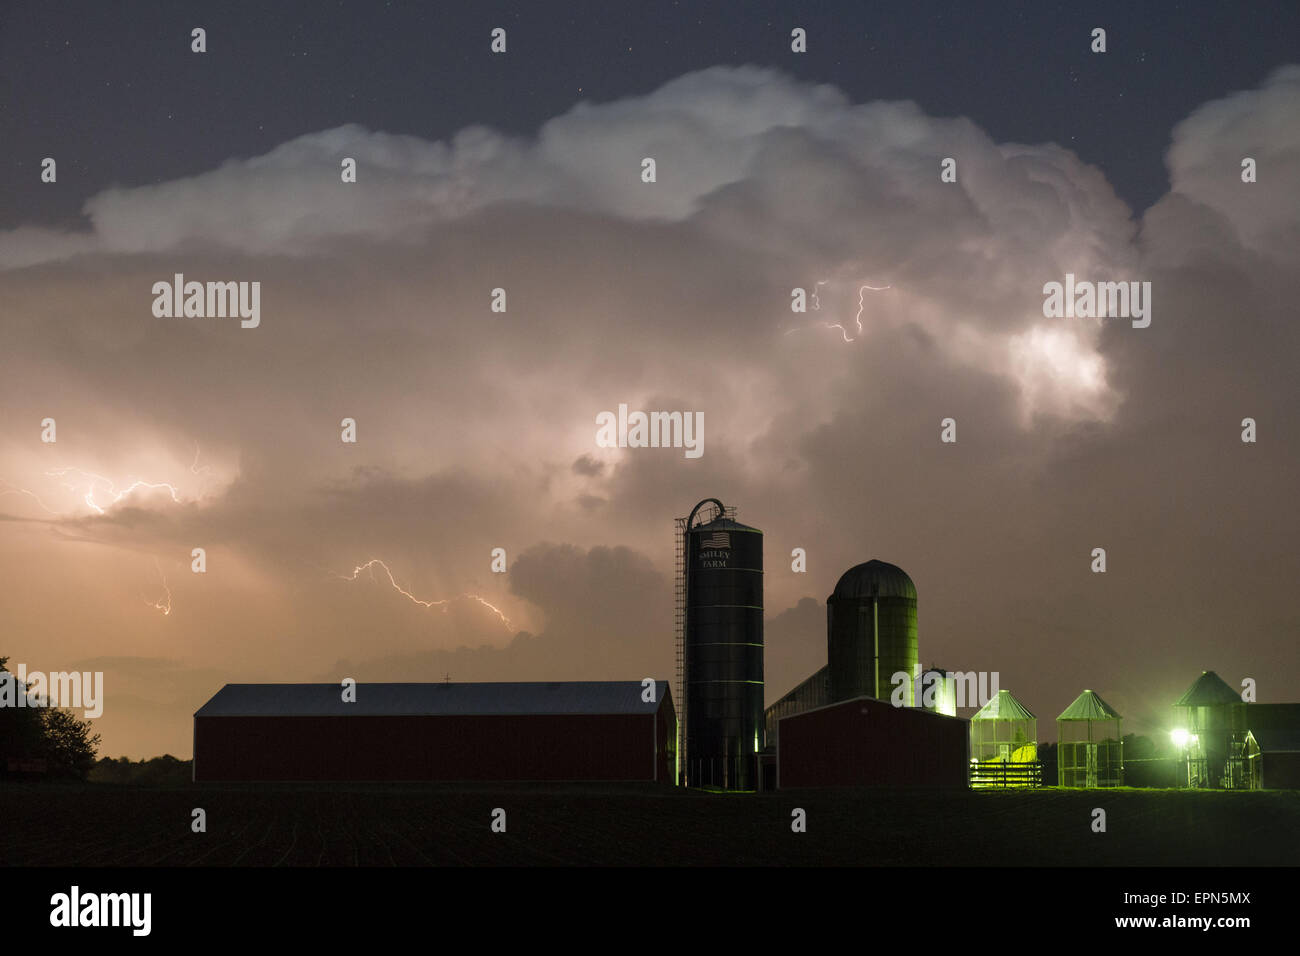 Town Of Wallkill, N.Y, USA. 19th May, 2015. Lightning flashes in the clouds above the barn and silos of a farm in the Town of Wallkill, New York, during a spring thunderstorm. © Tom Bushey/ZUMA Wire/Alamy Live News Stock Photo